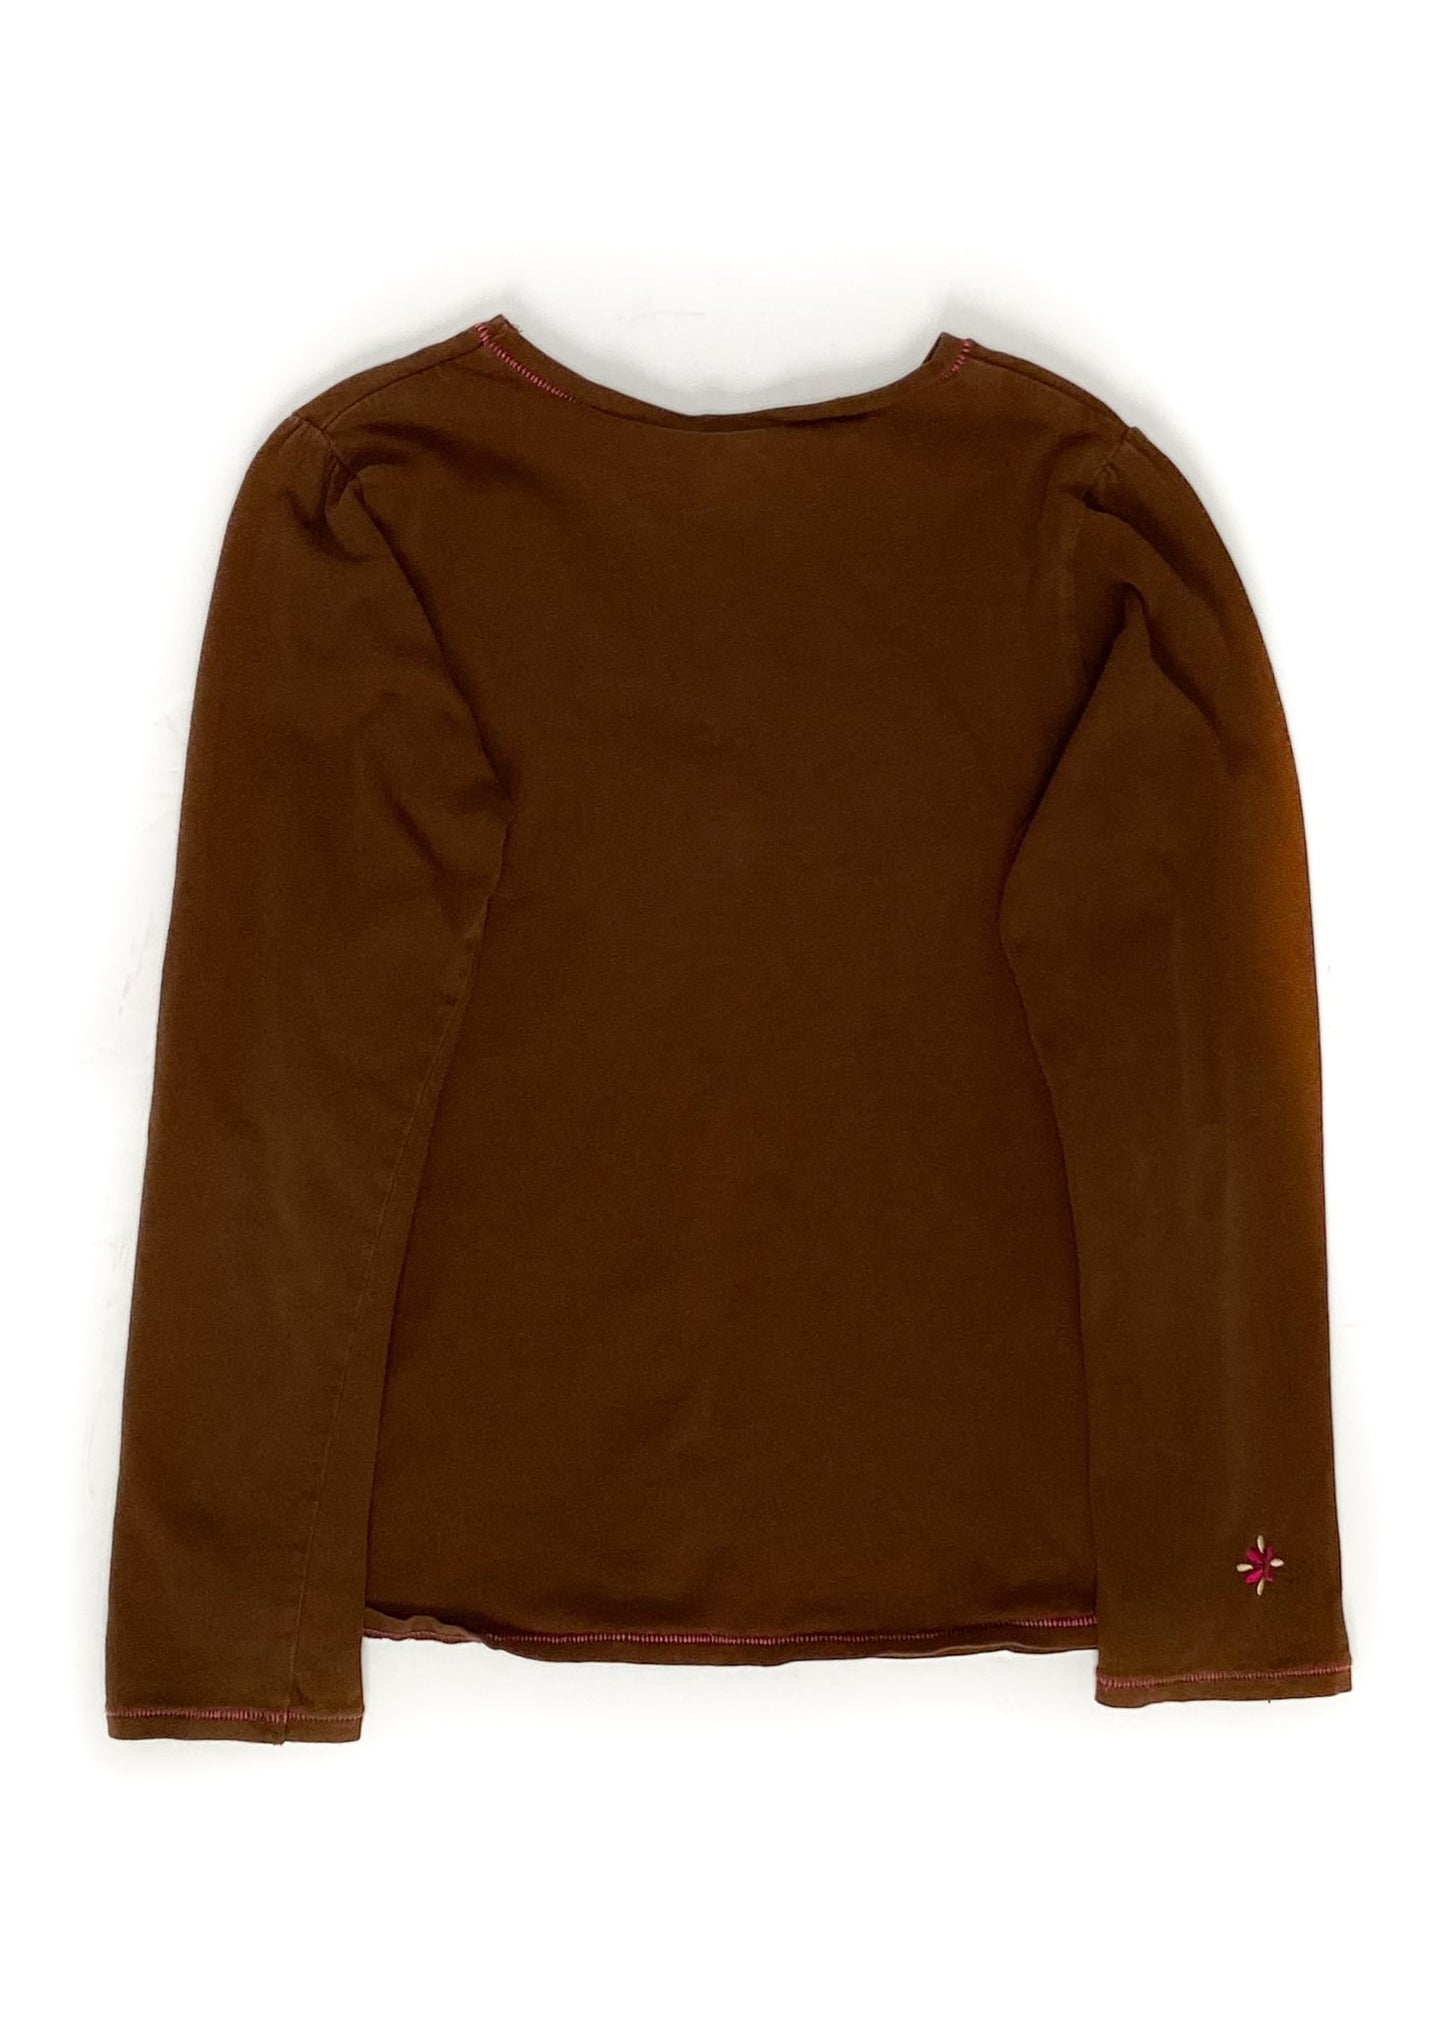 Long Sleeve Embroidered Shirt - Brown - Youth Large